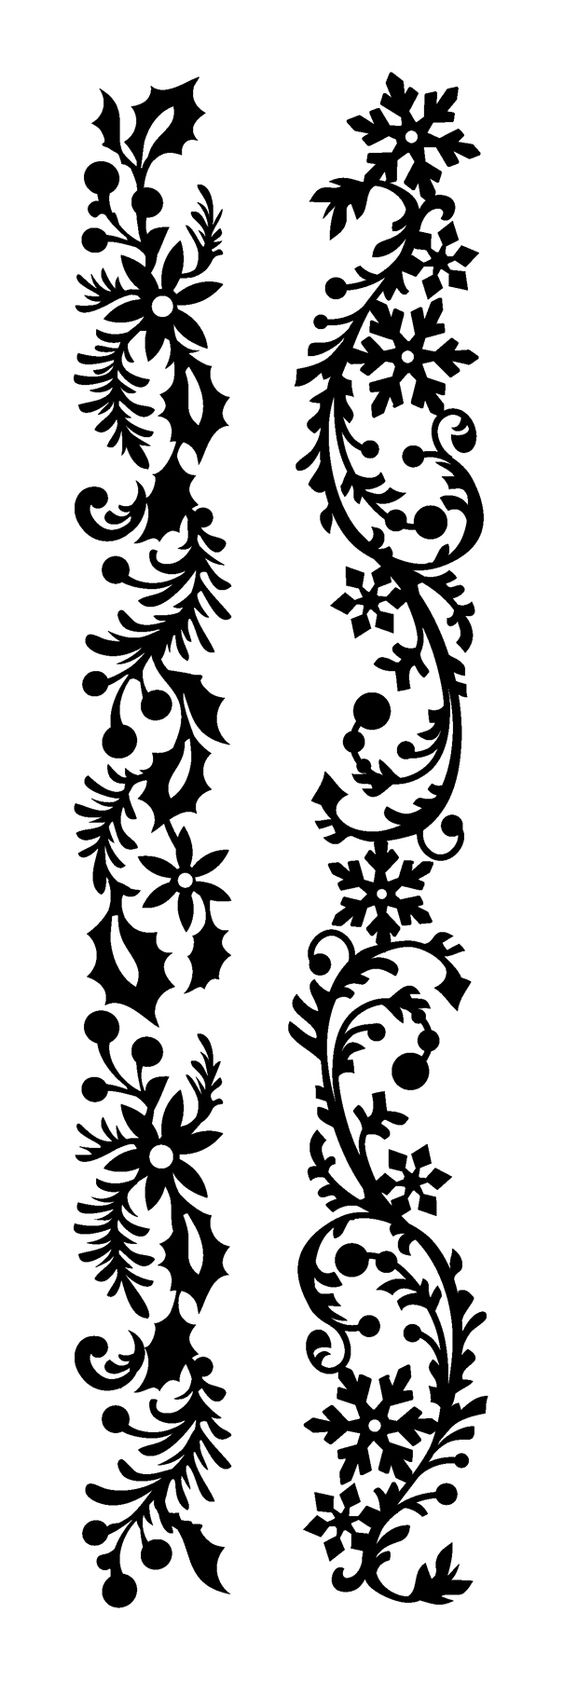 Free Garland Clipart Black And White, Download Free Clip Art